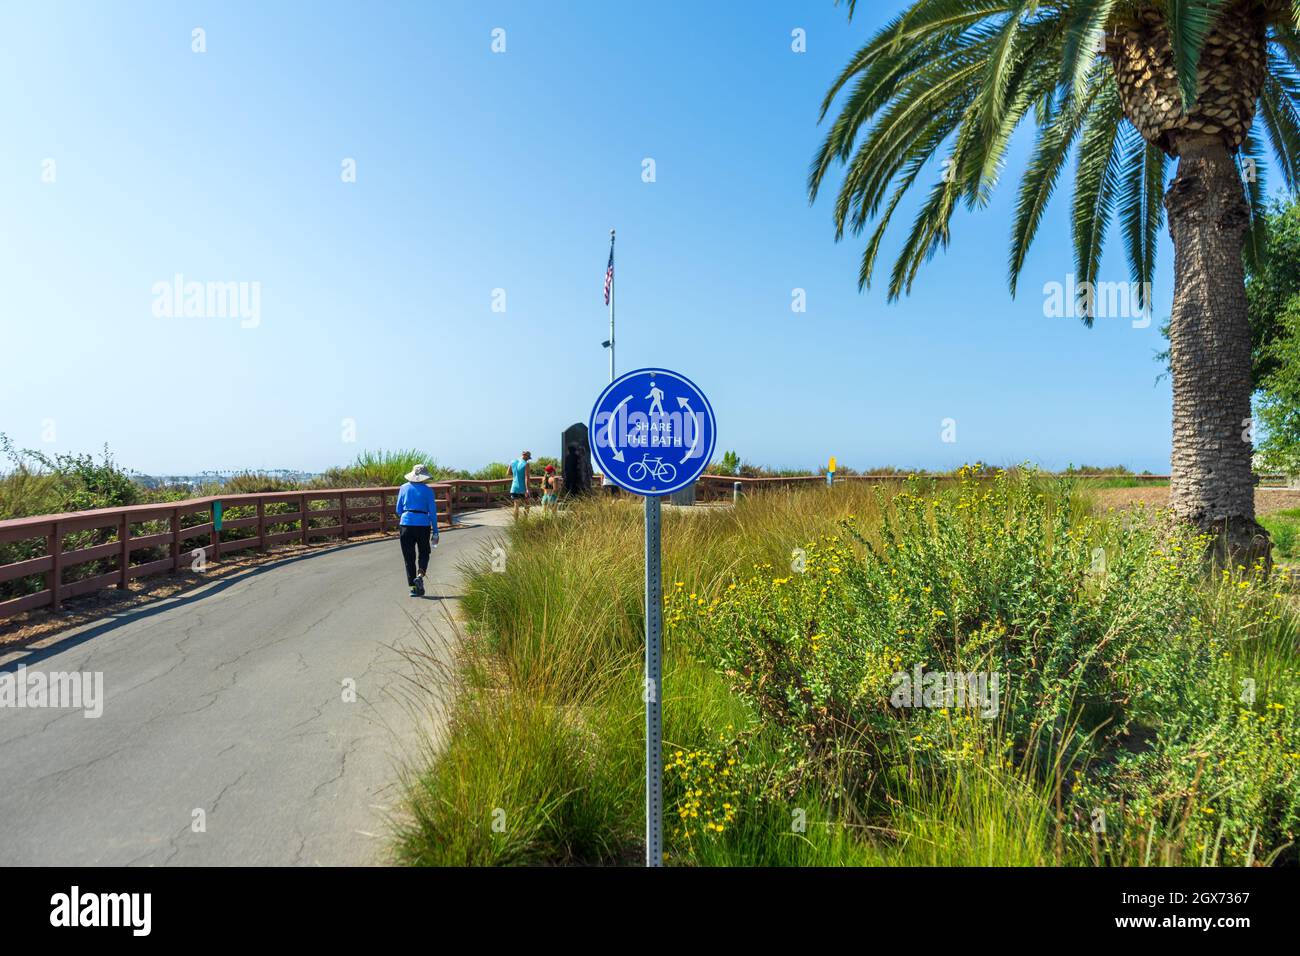 Newport Beach, CA, USA – August 12, 2021: A Share the Path sign for pedestrian and bicycle on a trail at Castaways Park in Newport Beach, California. Stock Photo